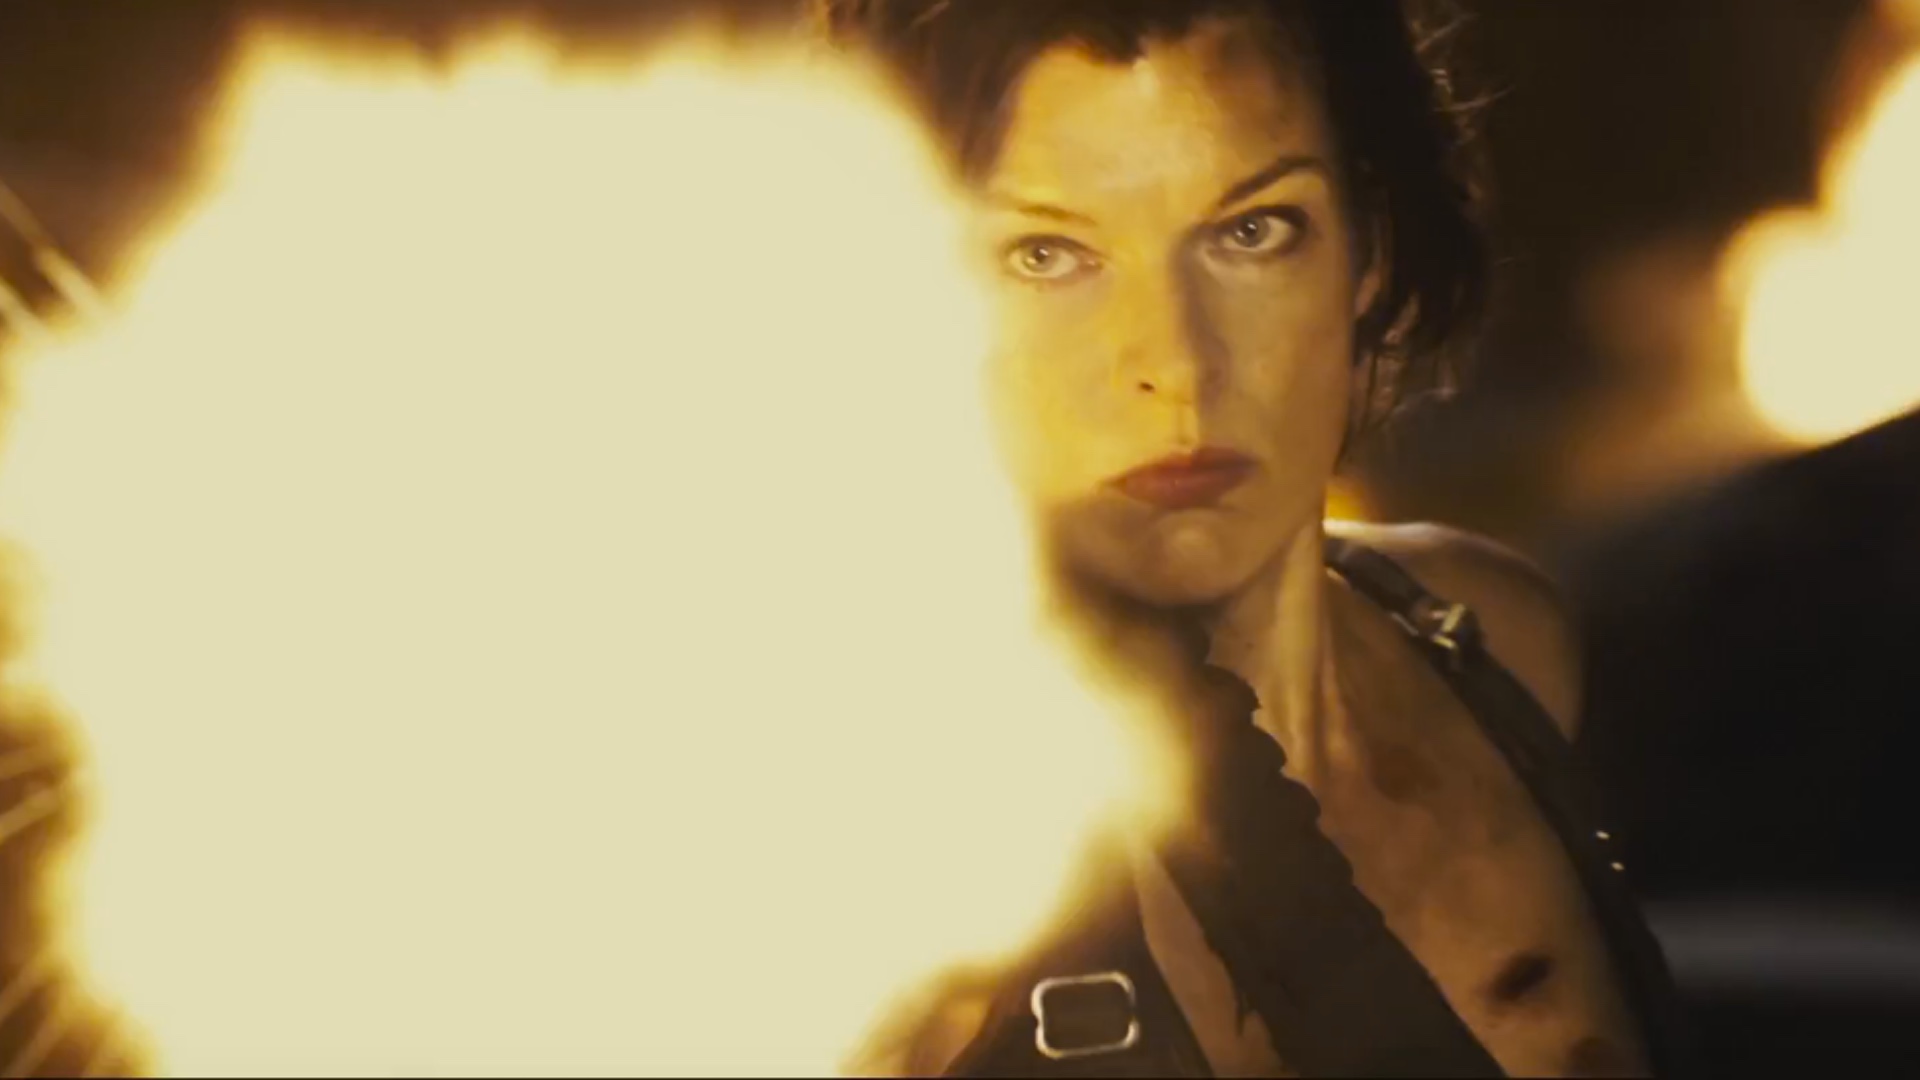 Watch: Resident Evil: The Final Chapter Full NYCC Trailer